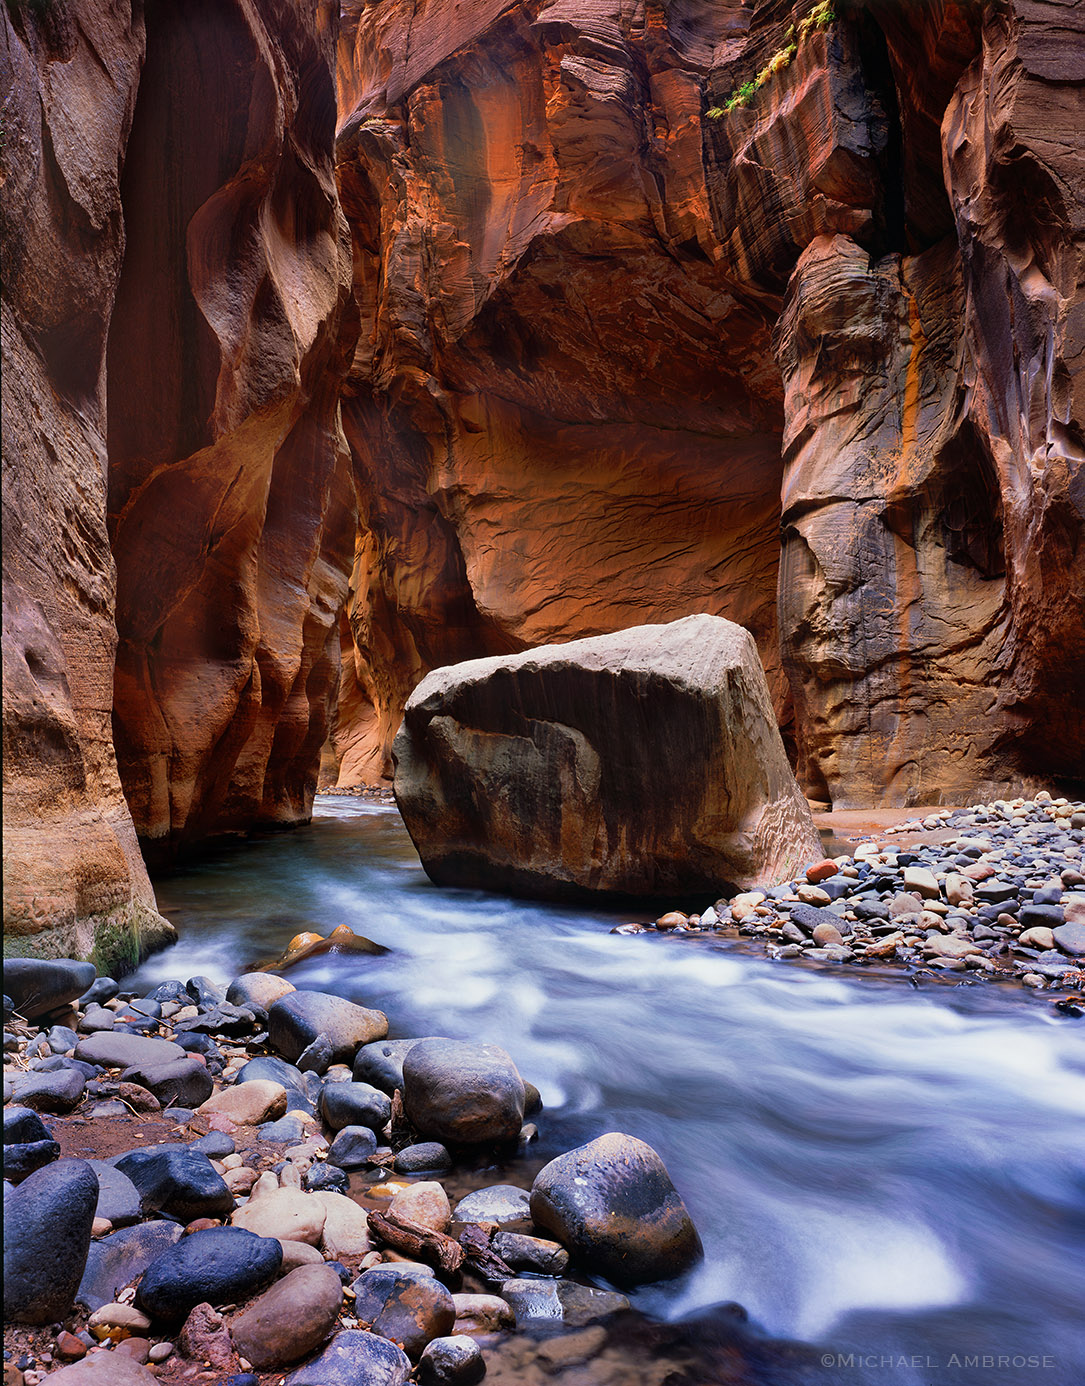 The Wall Street section of the Virgin River Narrows is best known for dramatic slot can and glowing diffused light.